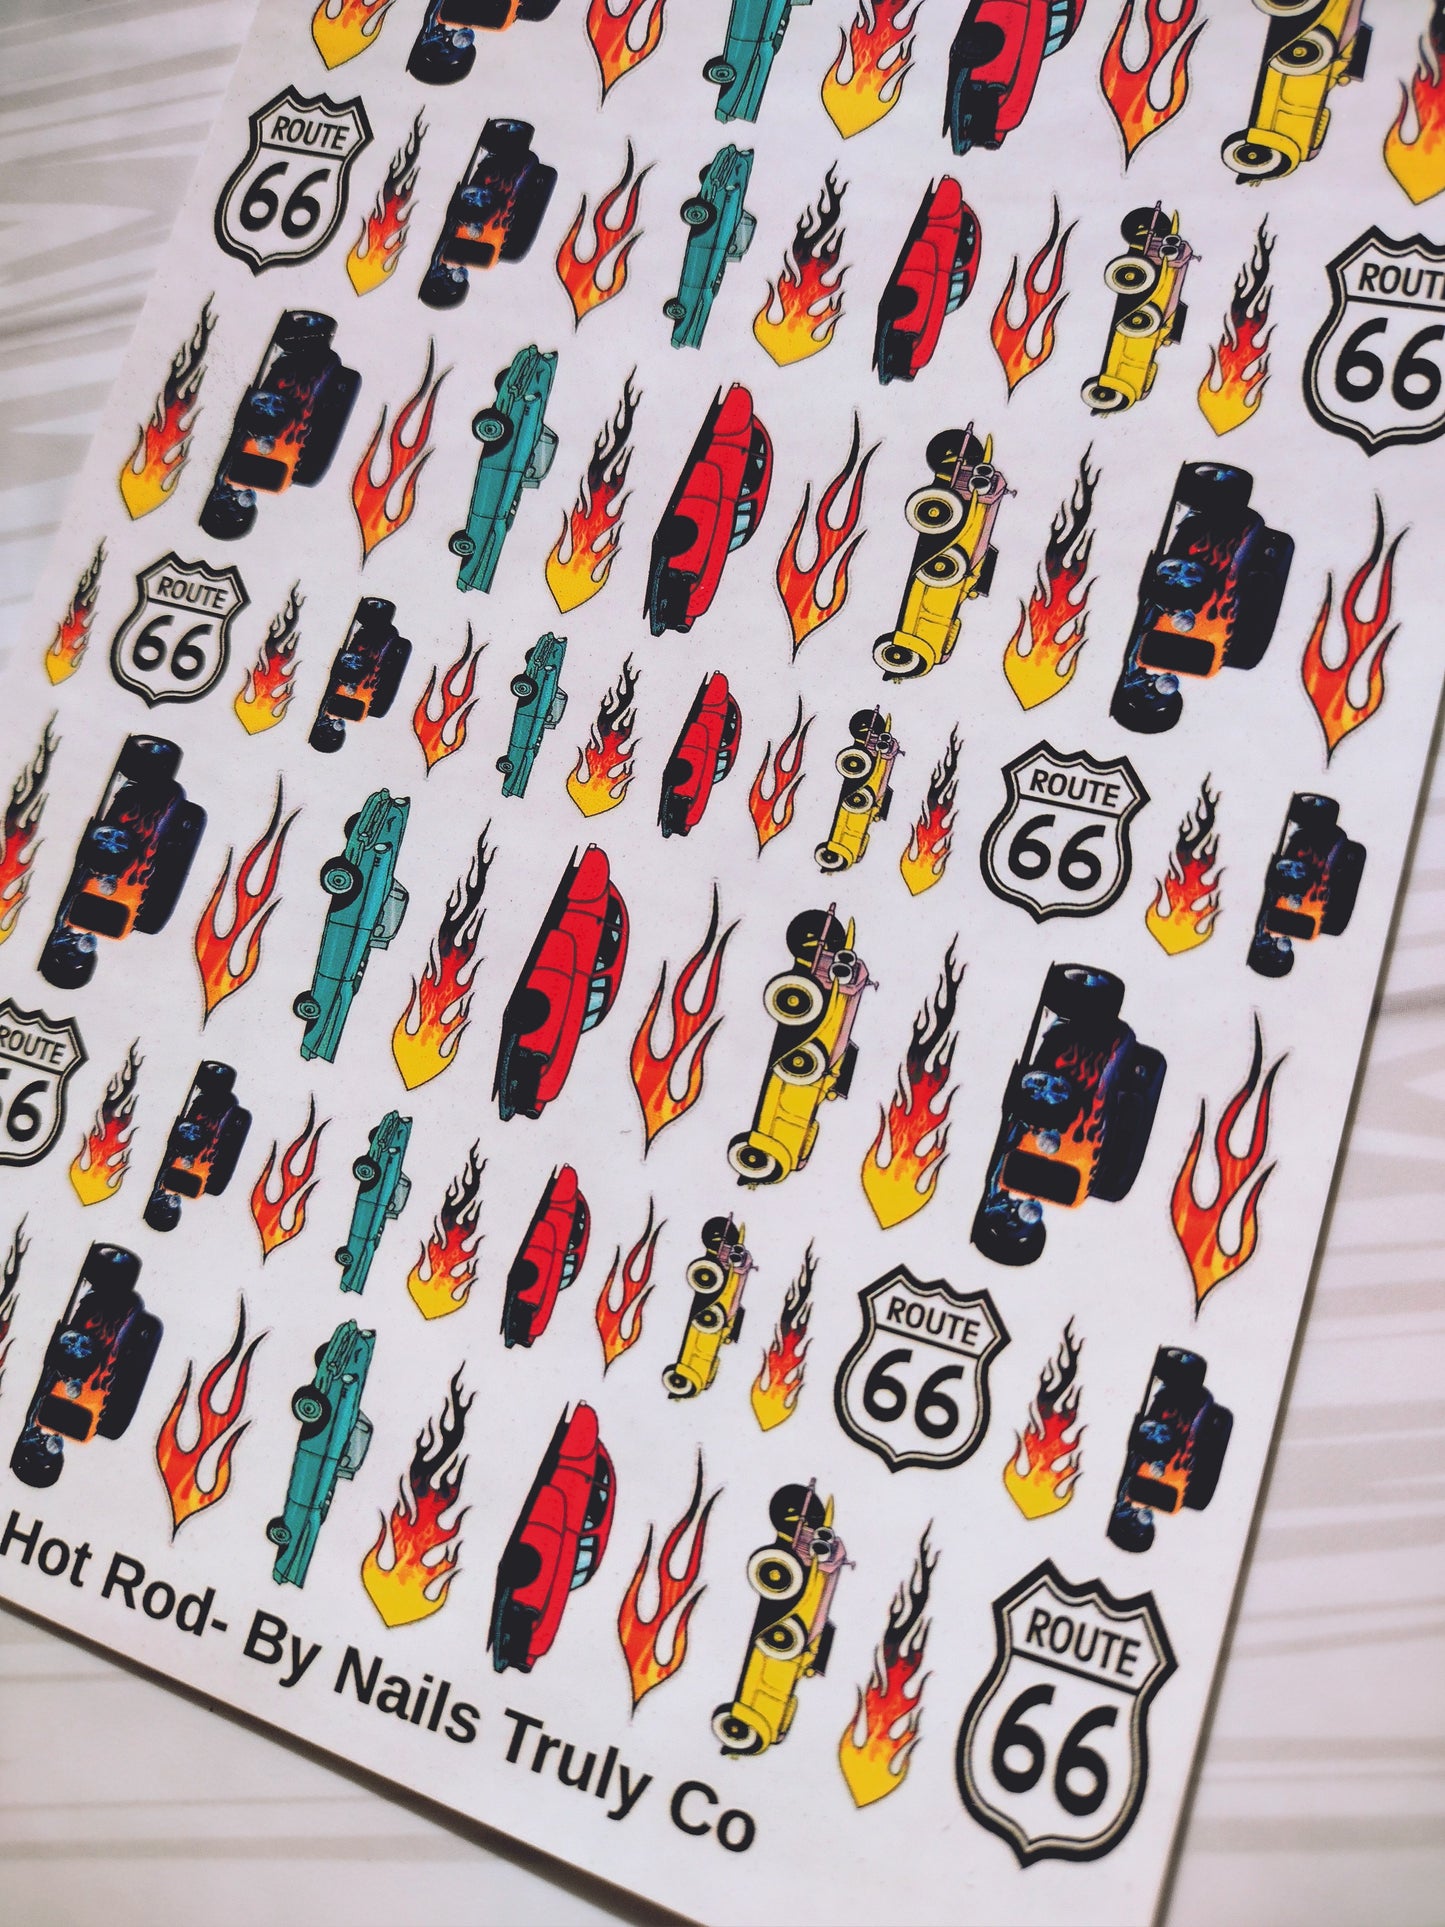 Hot Rod - Vintage Cars - Decals For Nails